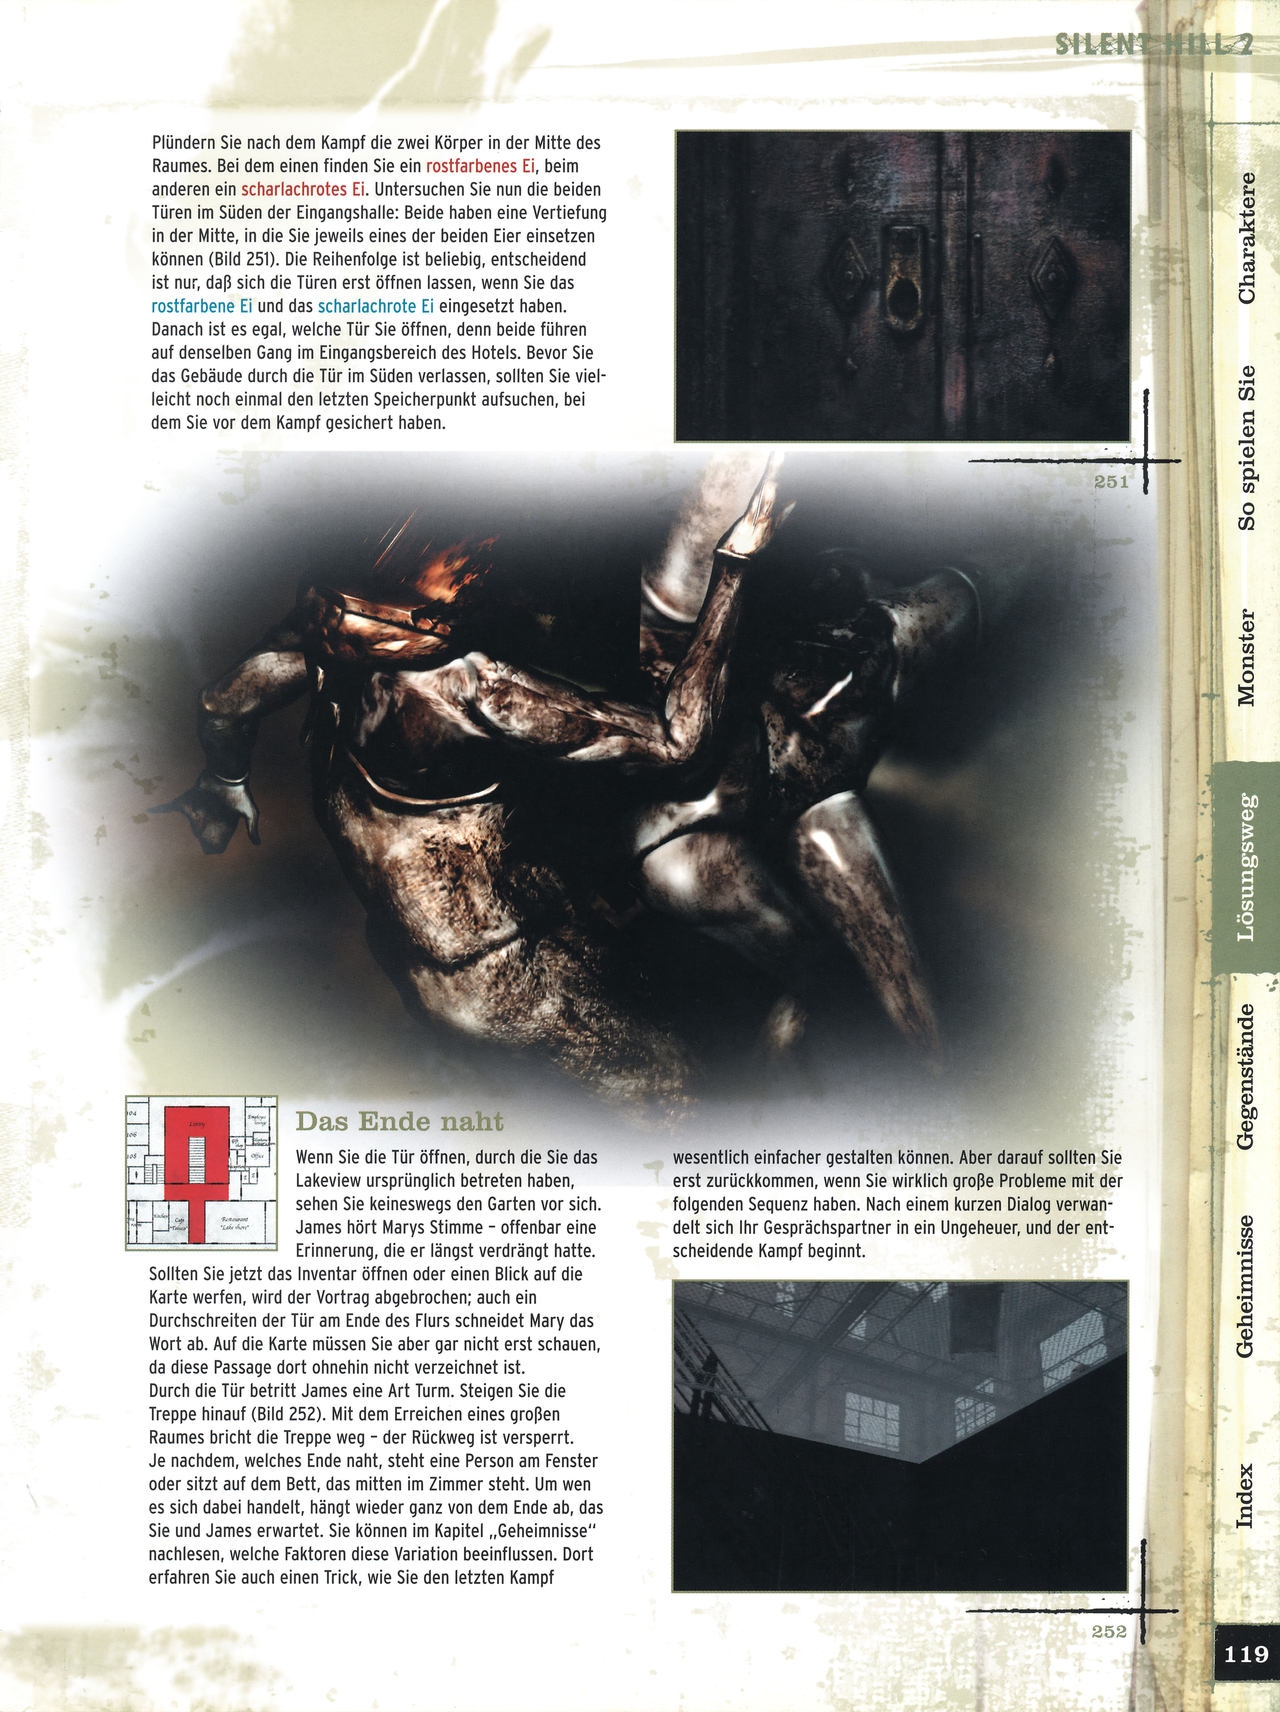 Silent Hill 2 Official Strategy Guide Authoritzed Collection 118